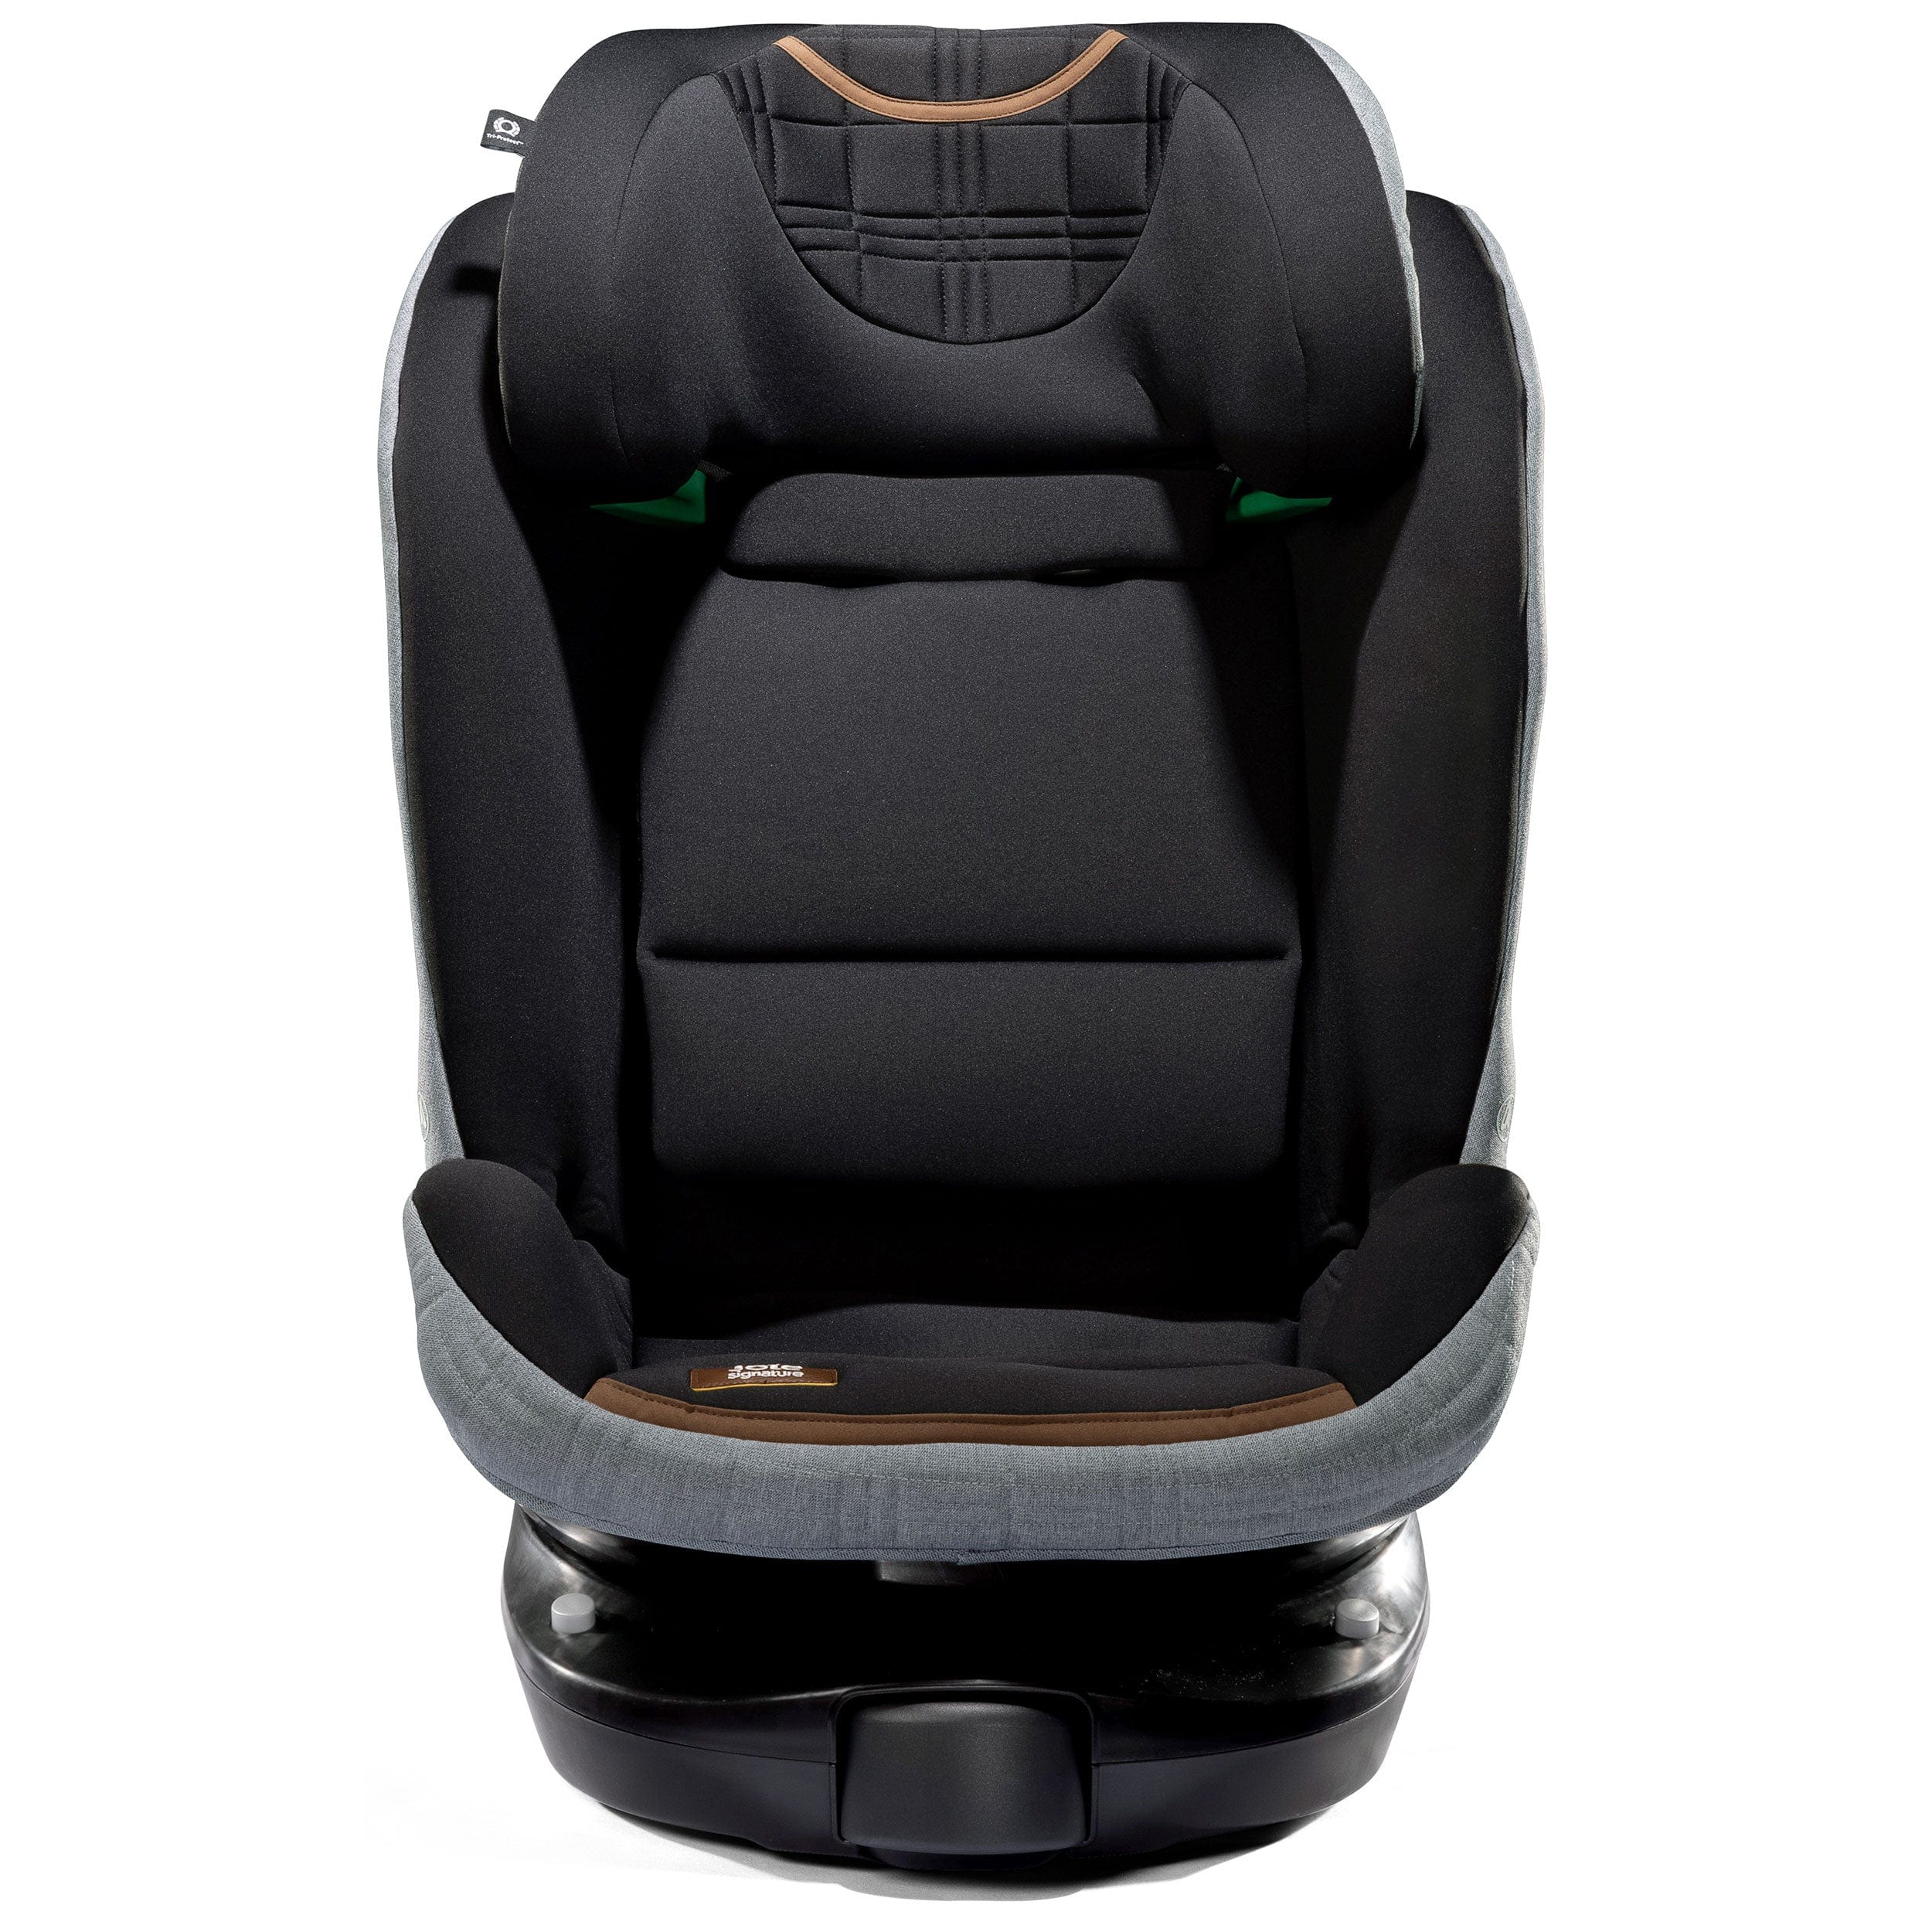 Joie combination car seats Joie i-Spin XL - Carbon C2205AACBN000